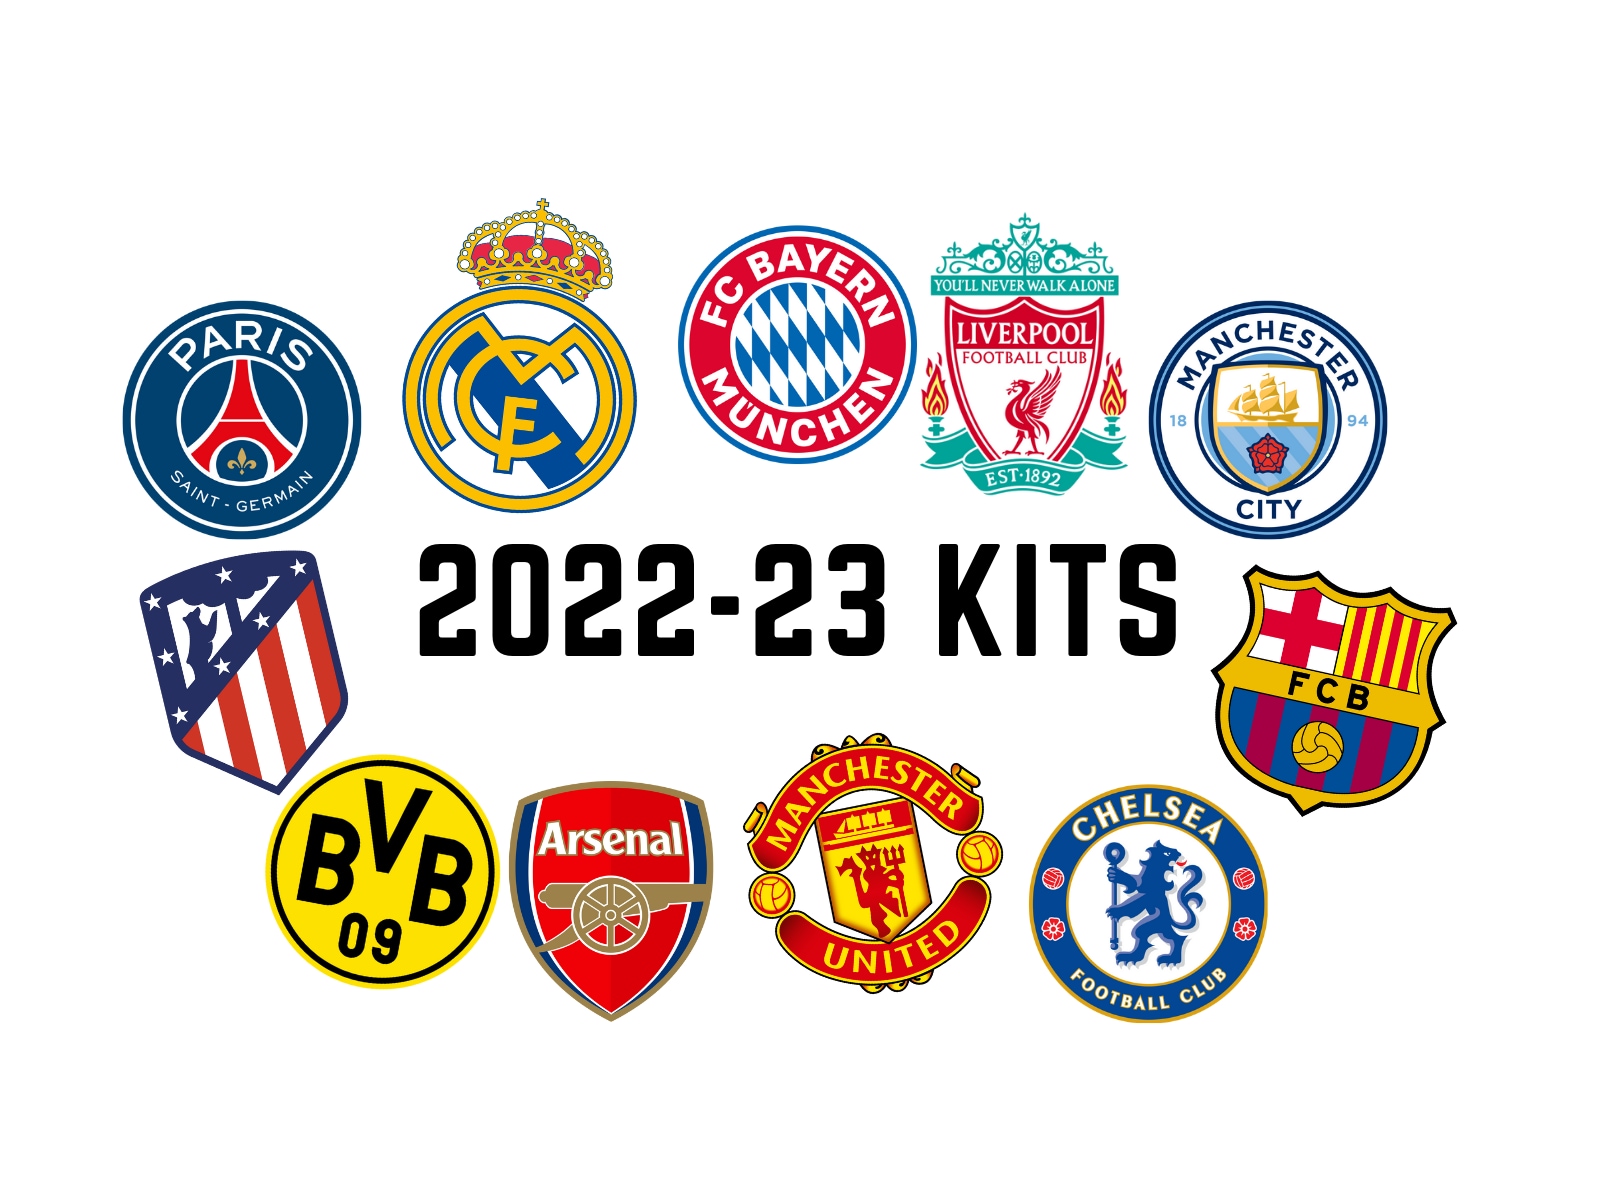 The new kits (official and leaked) from Europe's top teams - Some